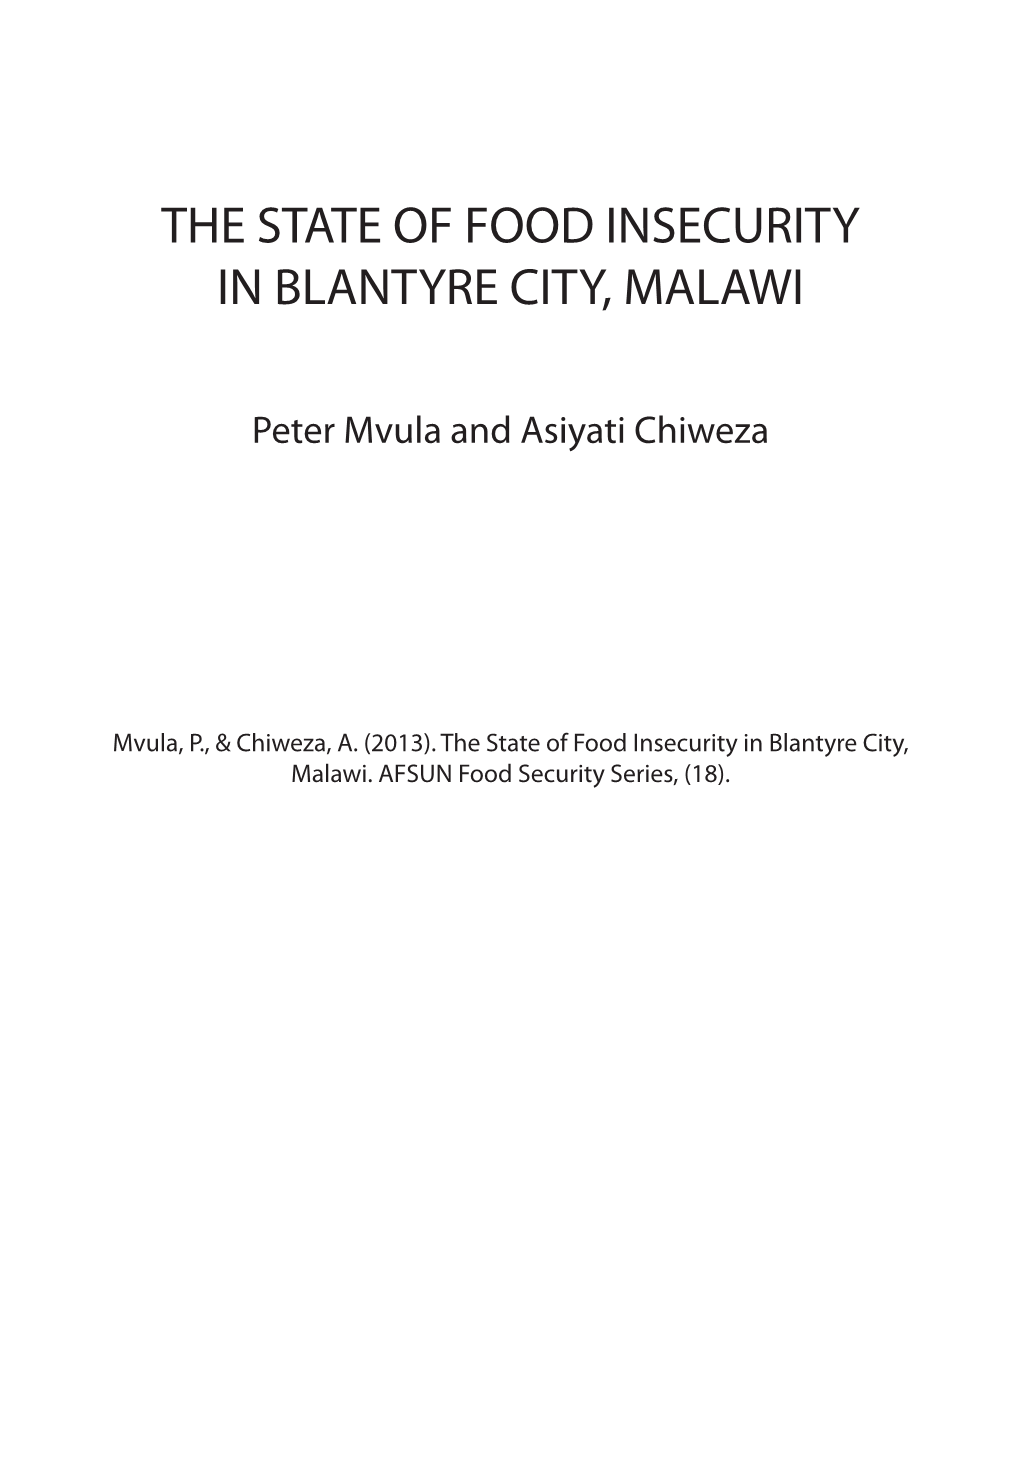 No. 18: the State of Food Insecurity in Blantyre City, Malawi